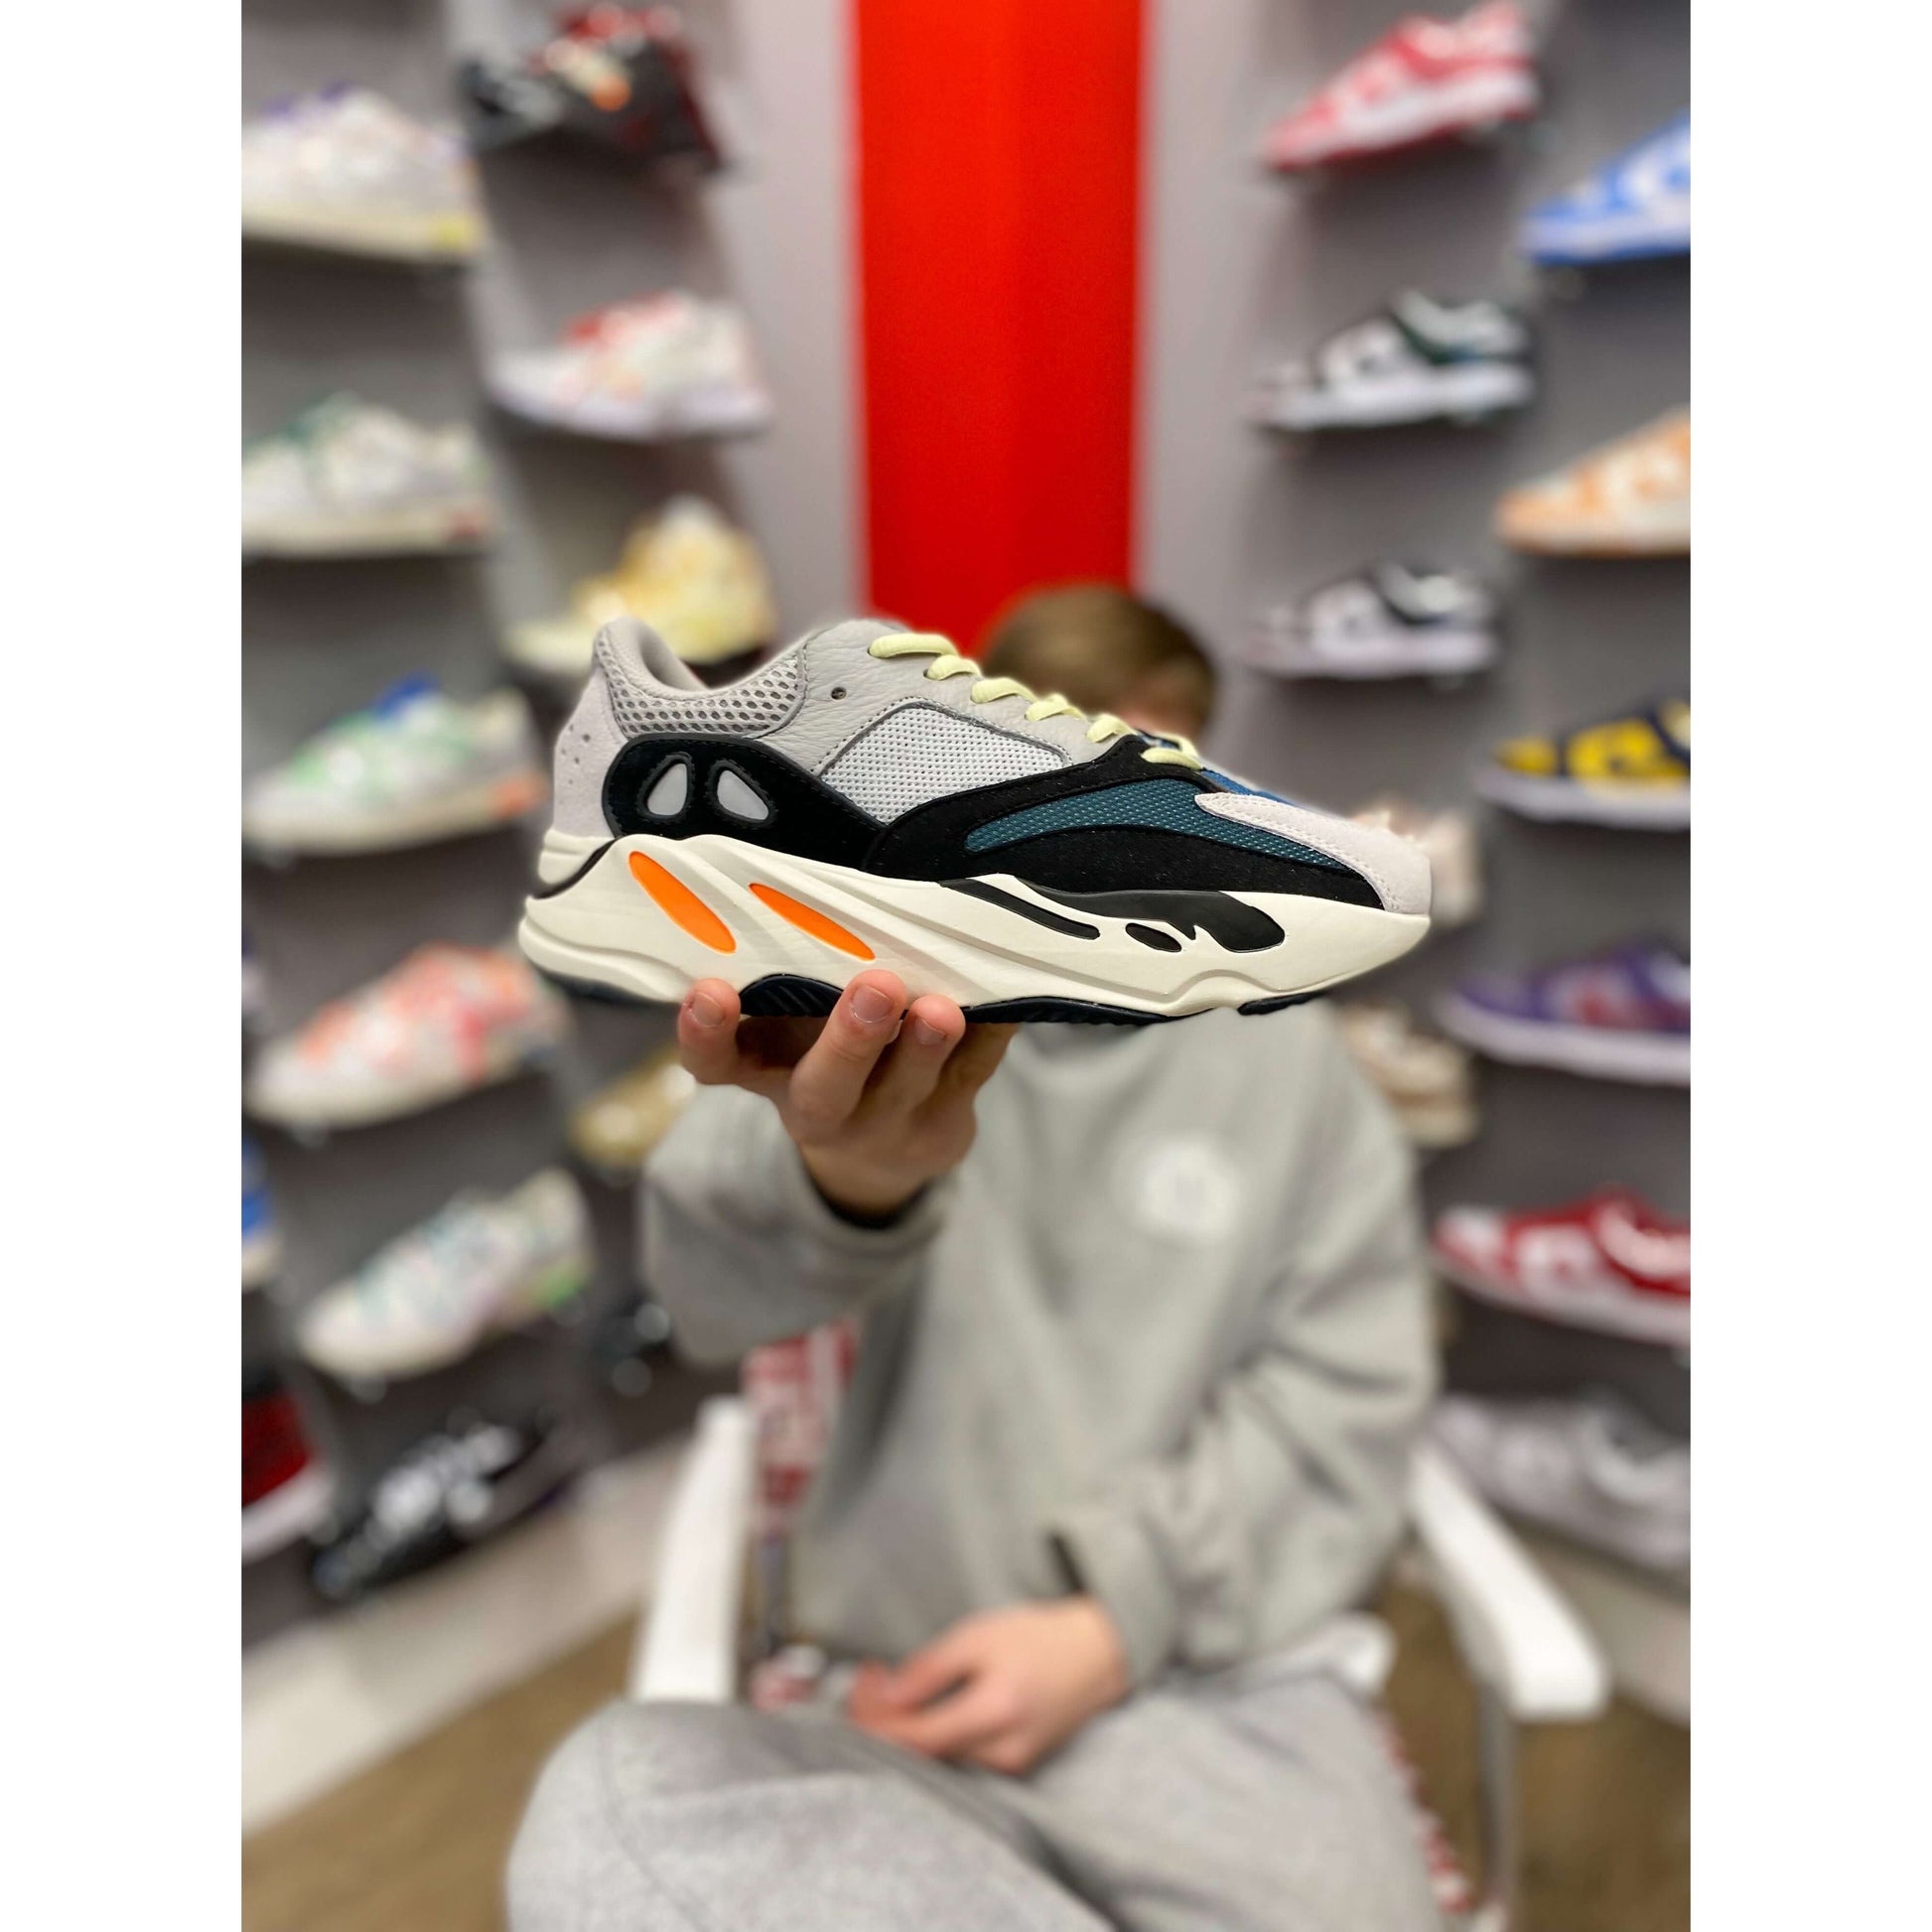 Adidas Yeezy Boost 700 Wave Runner from Yeezy